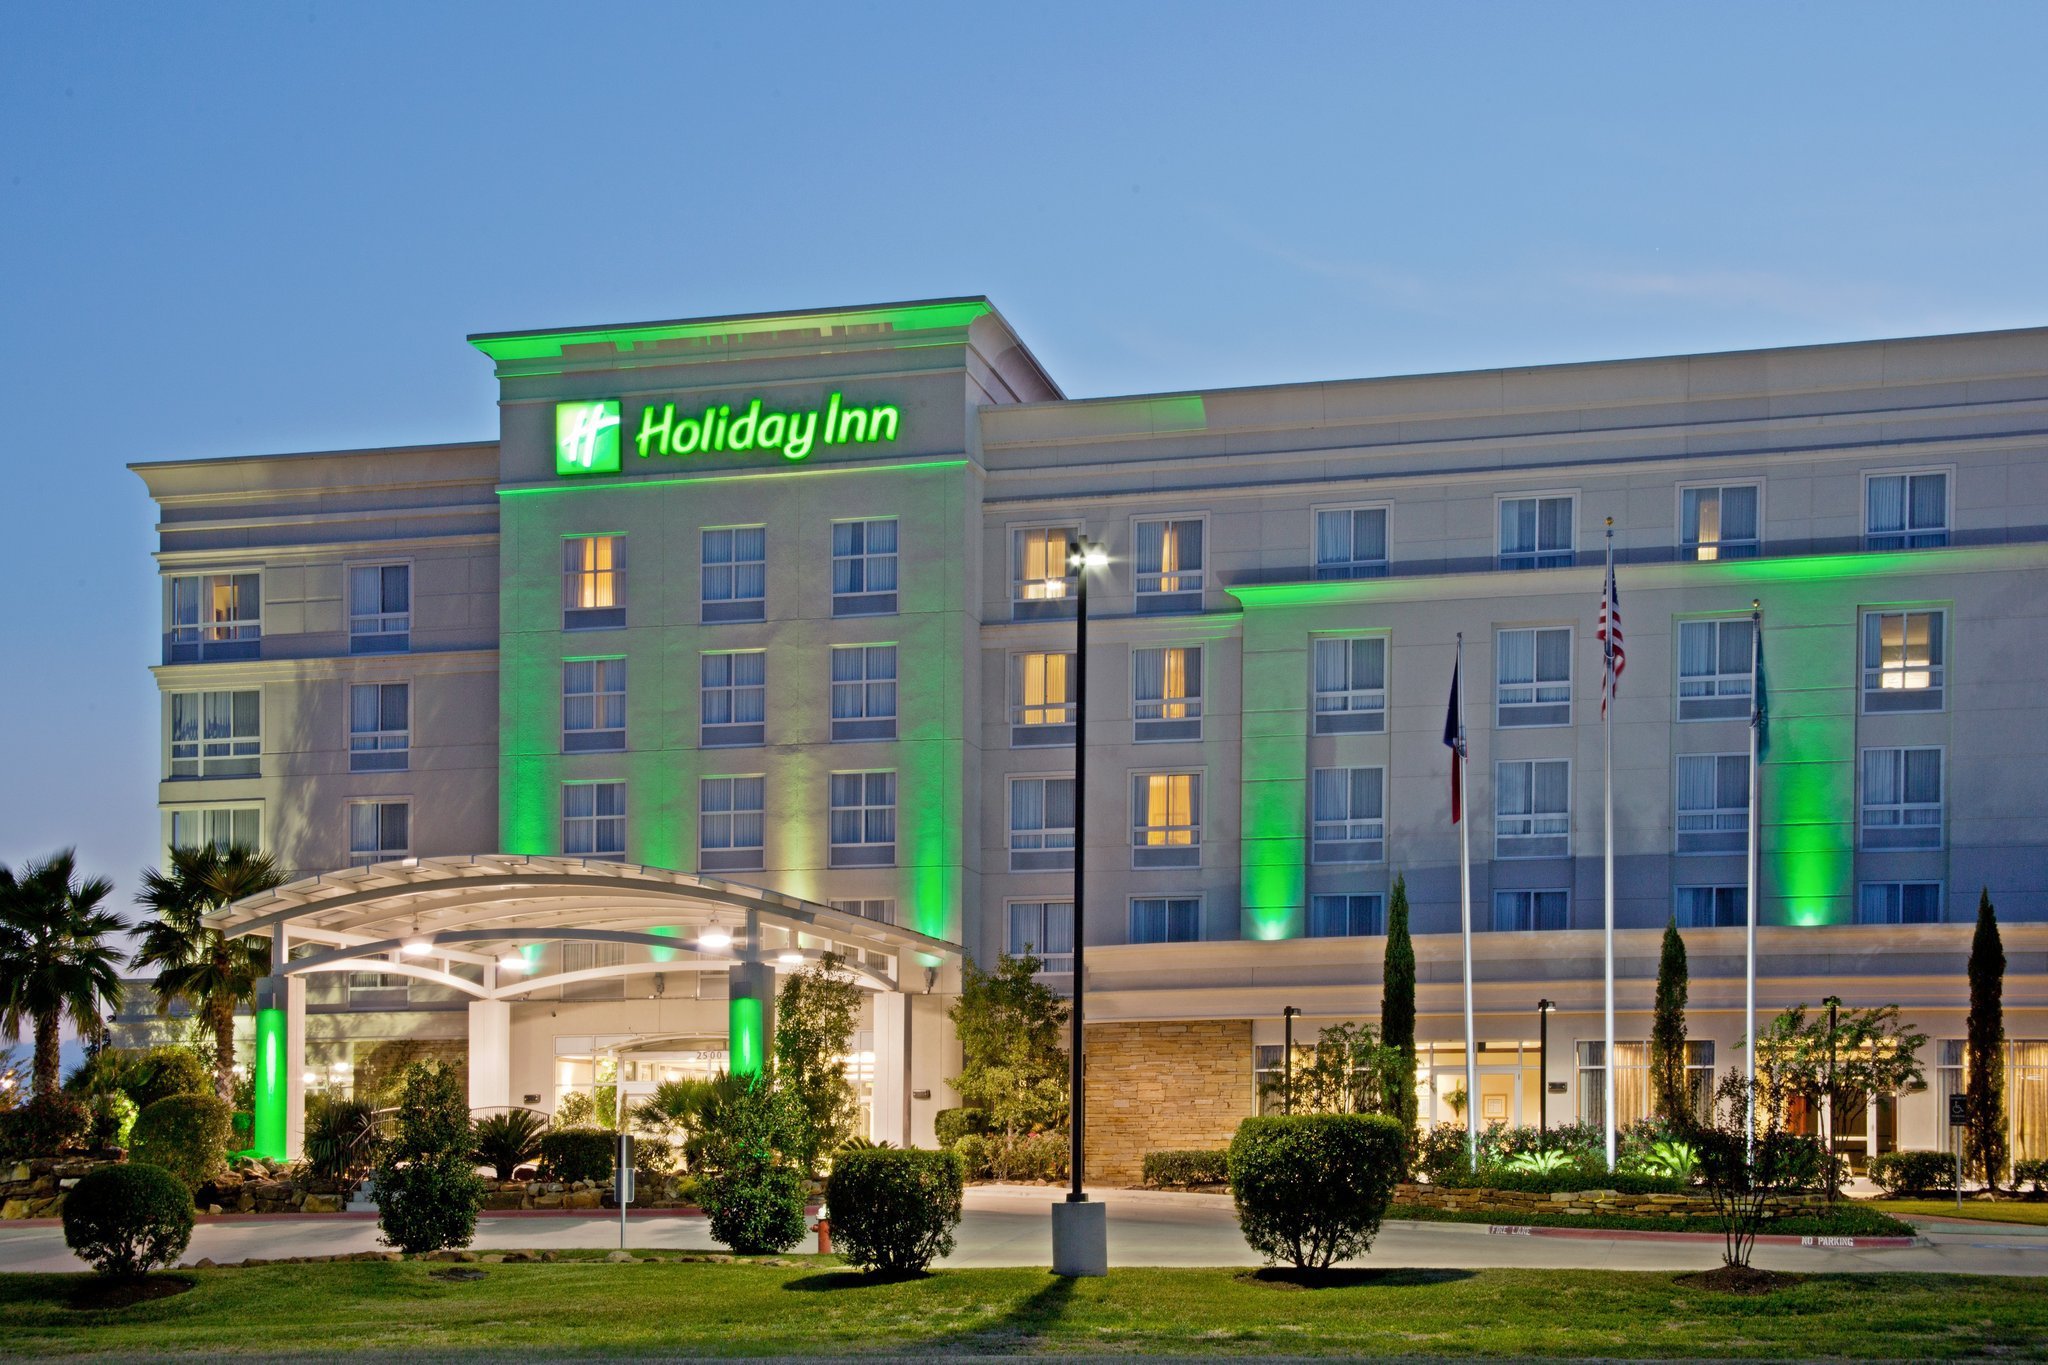 Photo of Holiday Inn Hotel & Suites College Station, College Station, TX